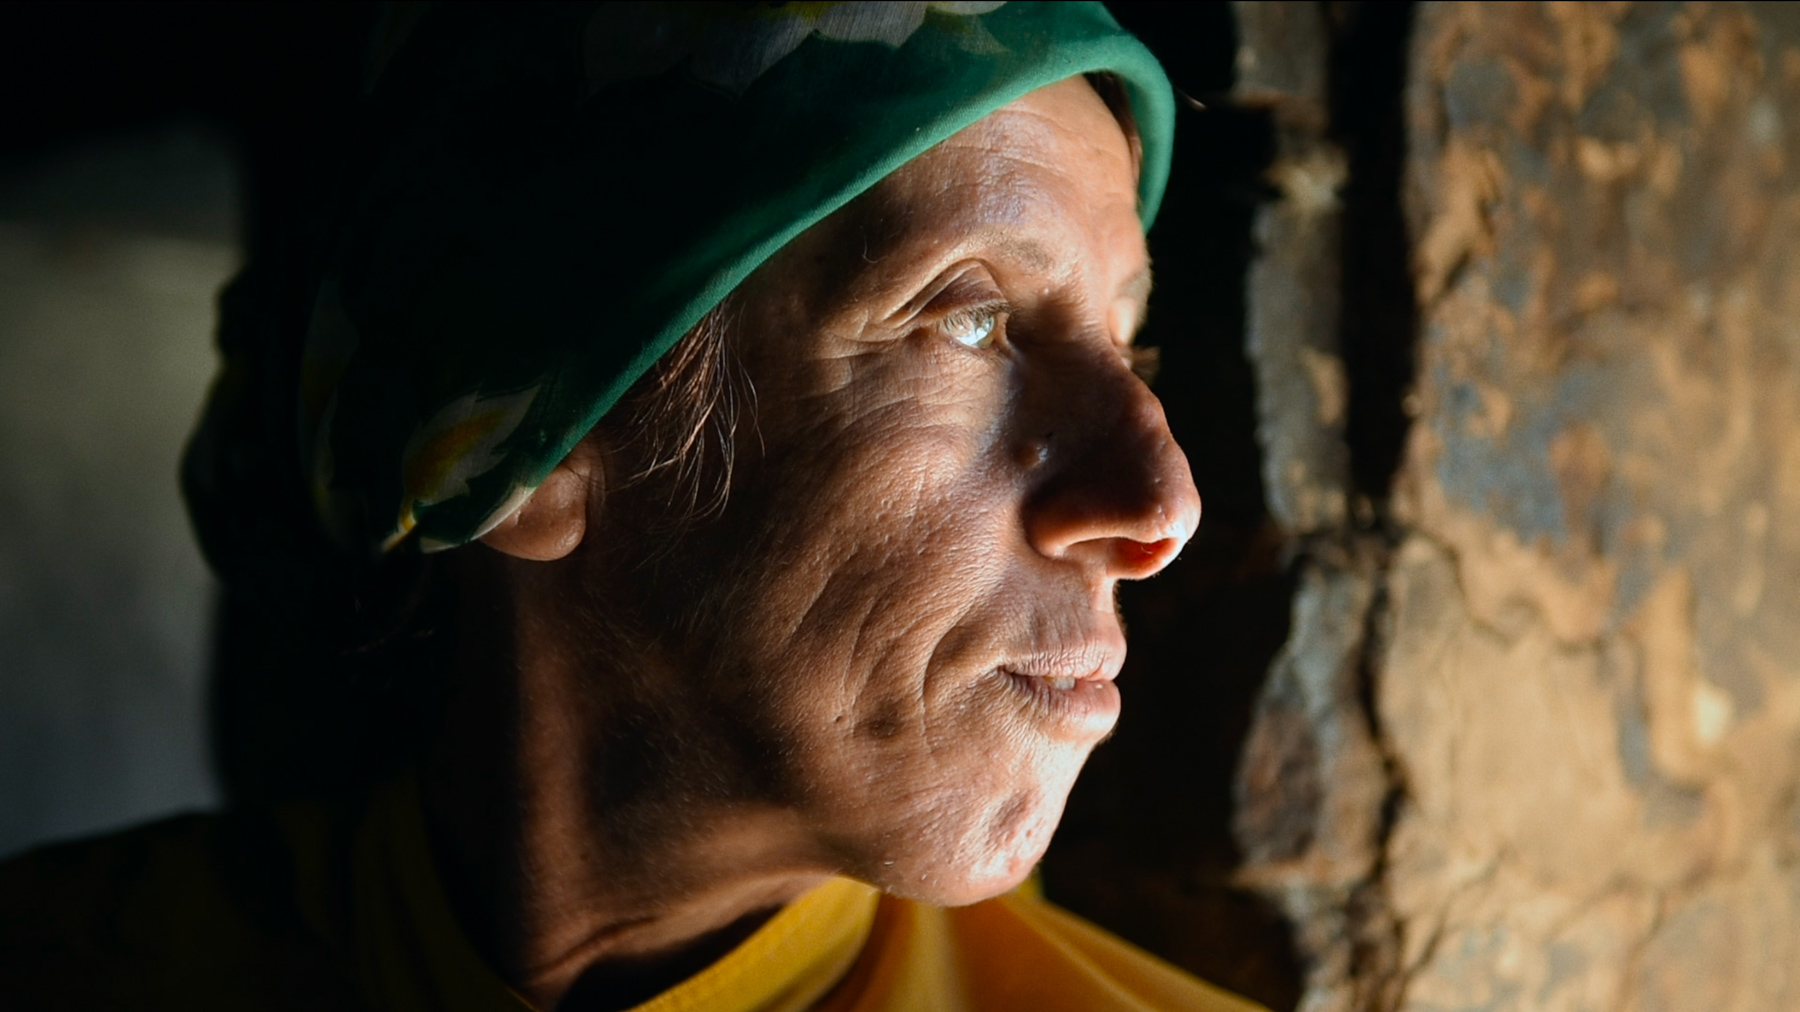 Hatidze Muratova, said to be the last wild beekeeper in Europe, looking out of a window